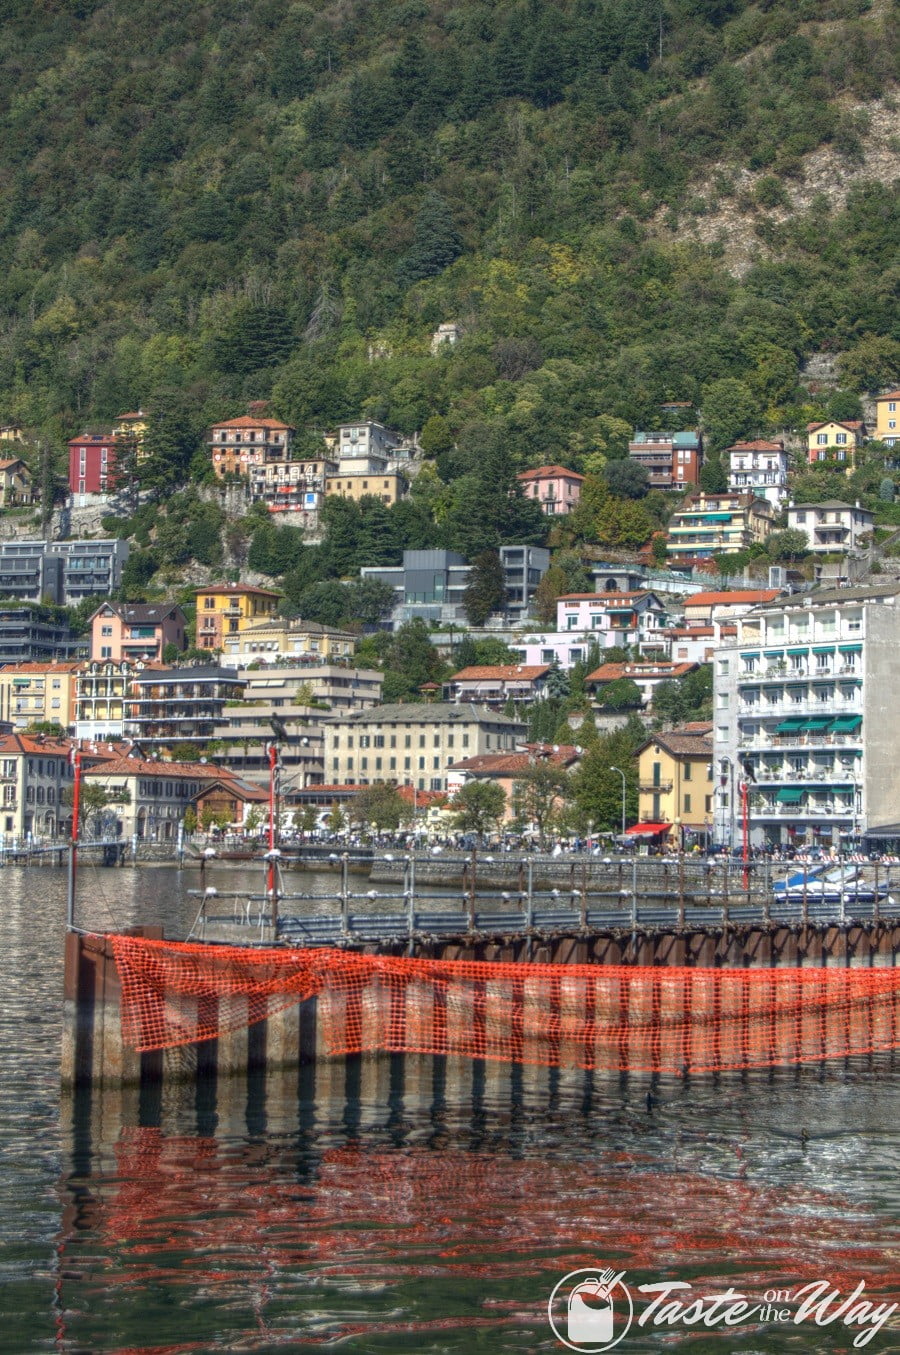 Check out 15+ amazing #views of Lake Como, #Italy! #travel #photography @tasteontheway